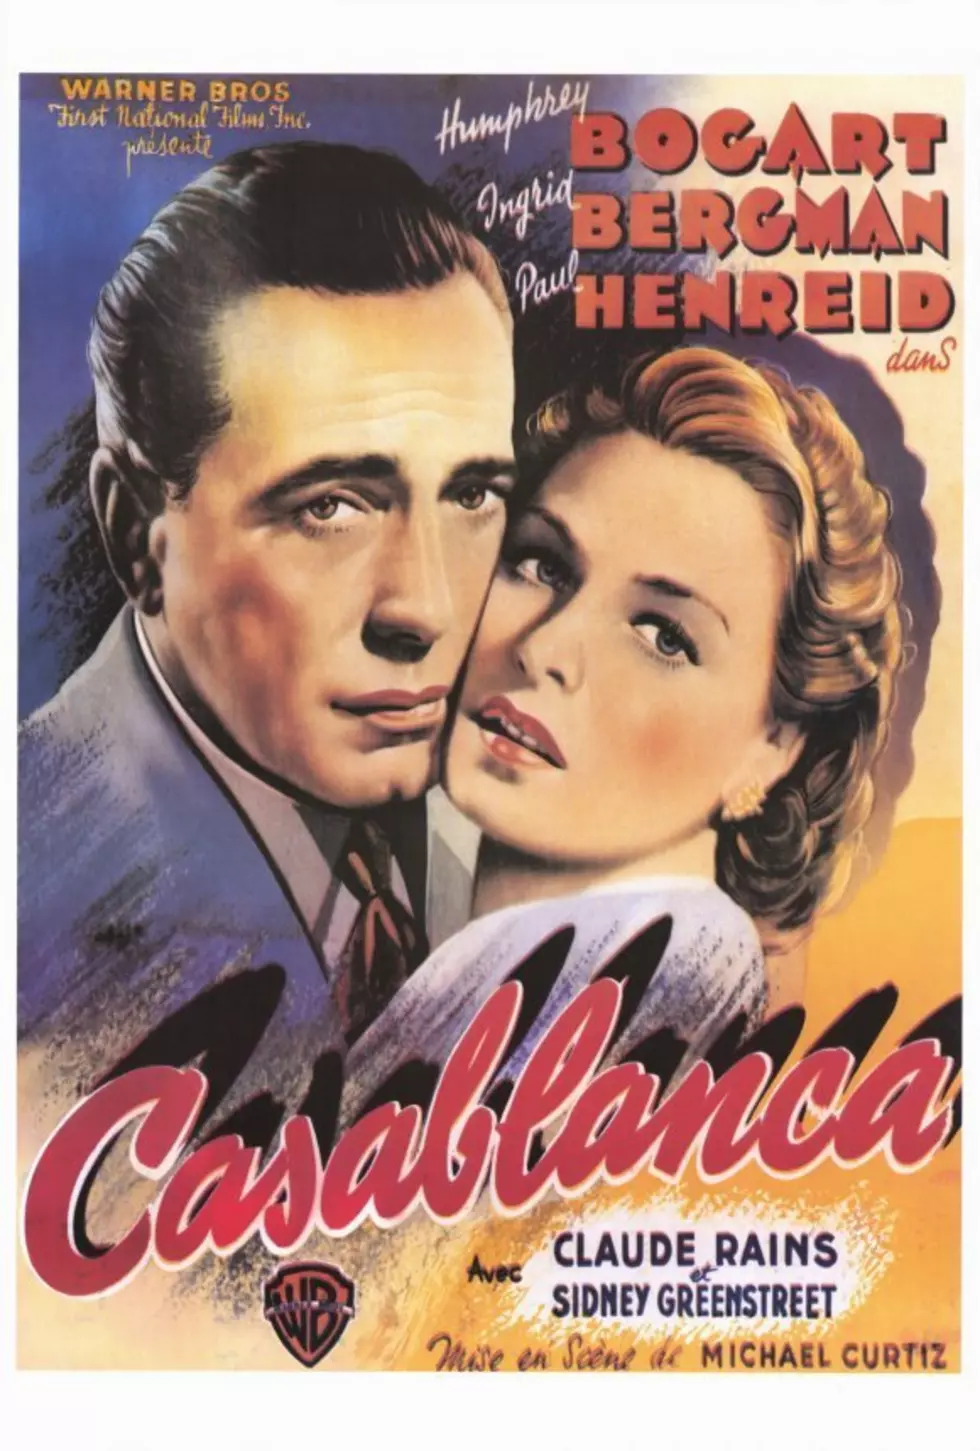 “Casablanca” To Be Seen In An Oneonta Theatre First Time In 70 Years!